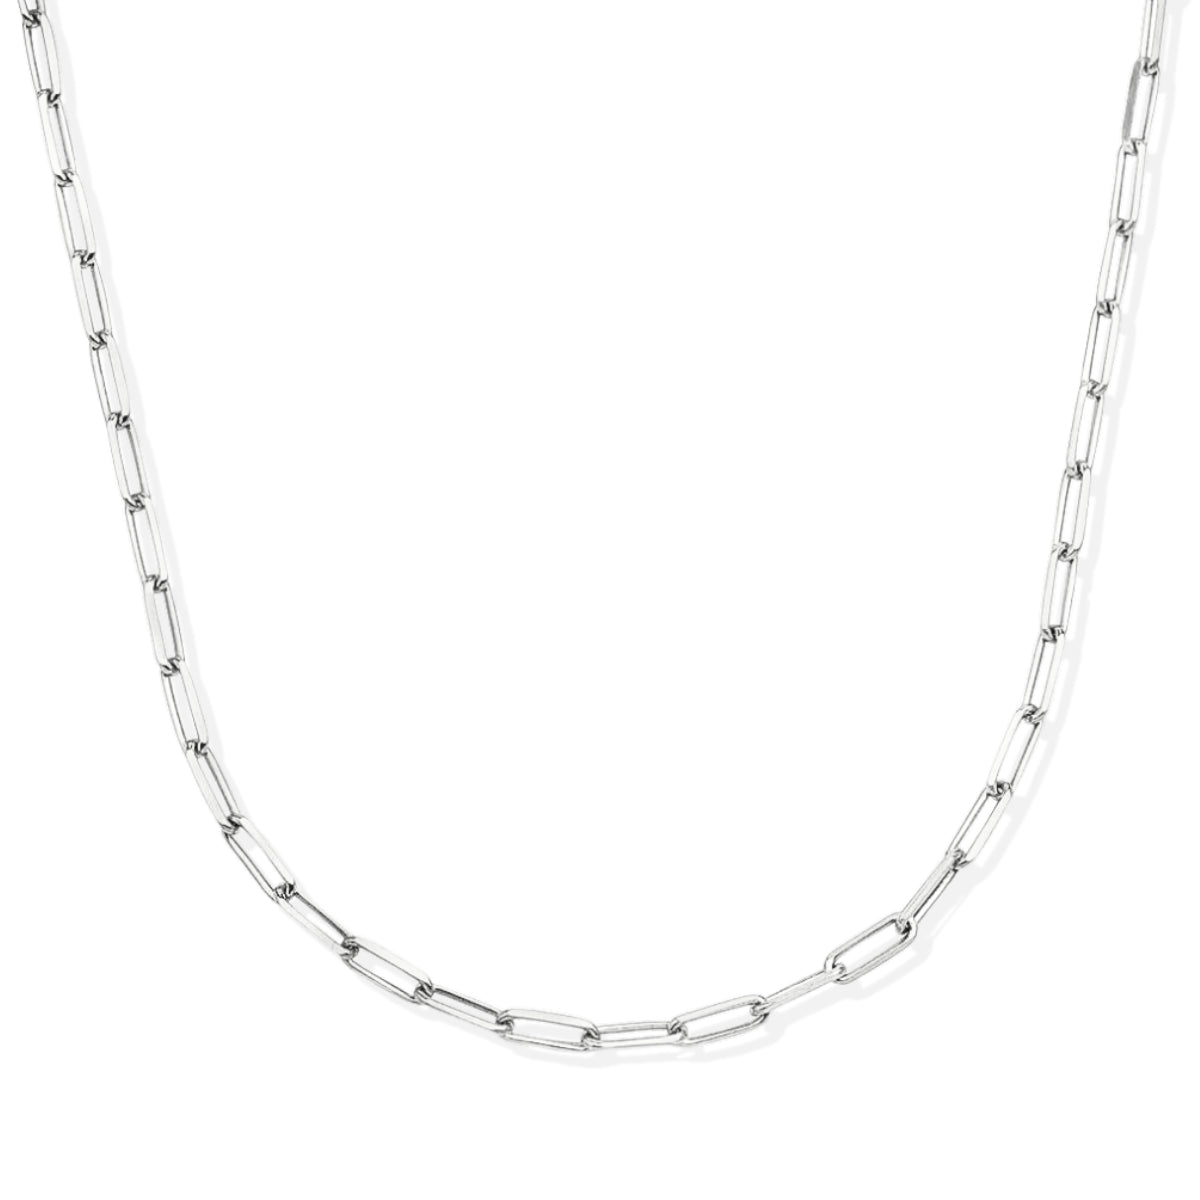 Featherly paperclip chain necklace in 925 sterling silver